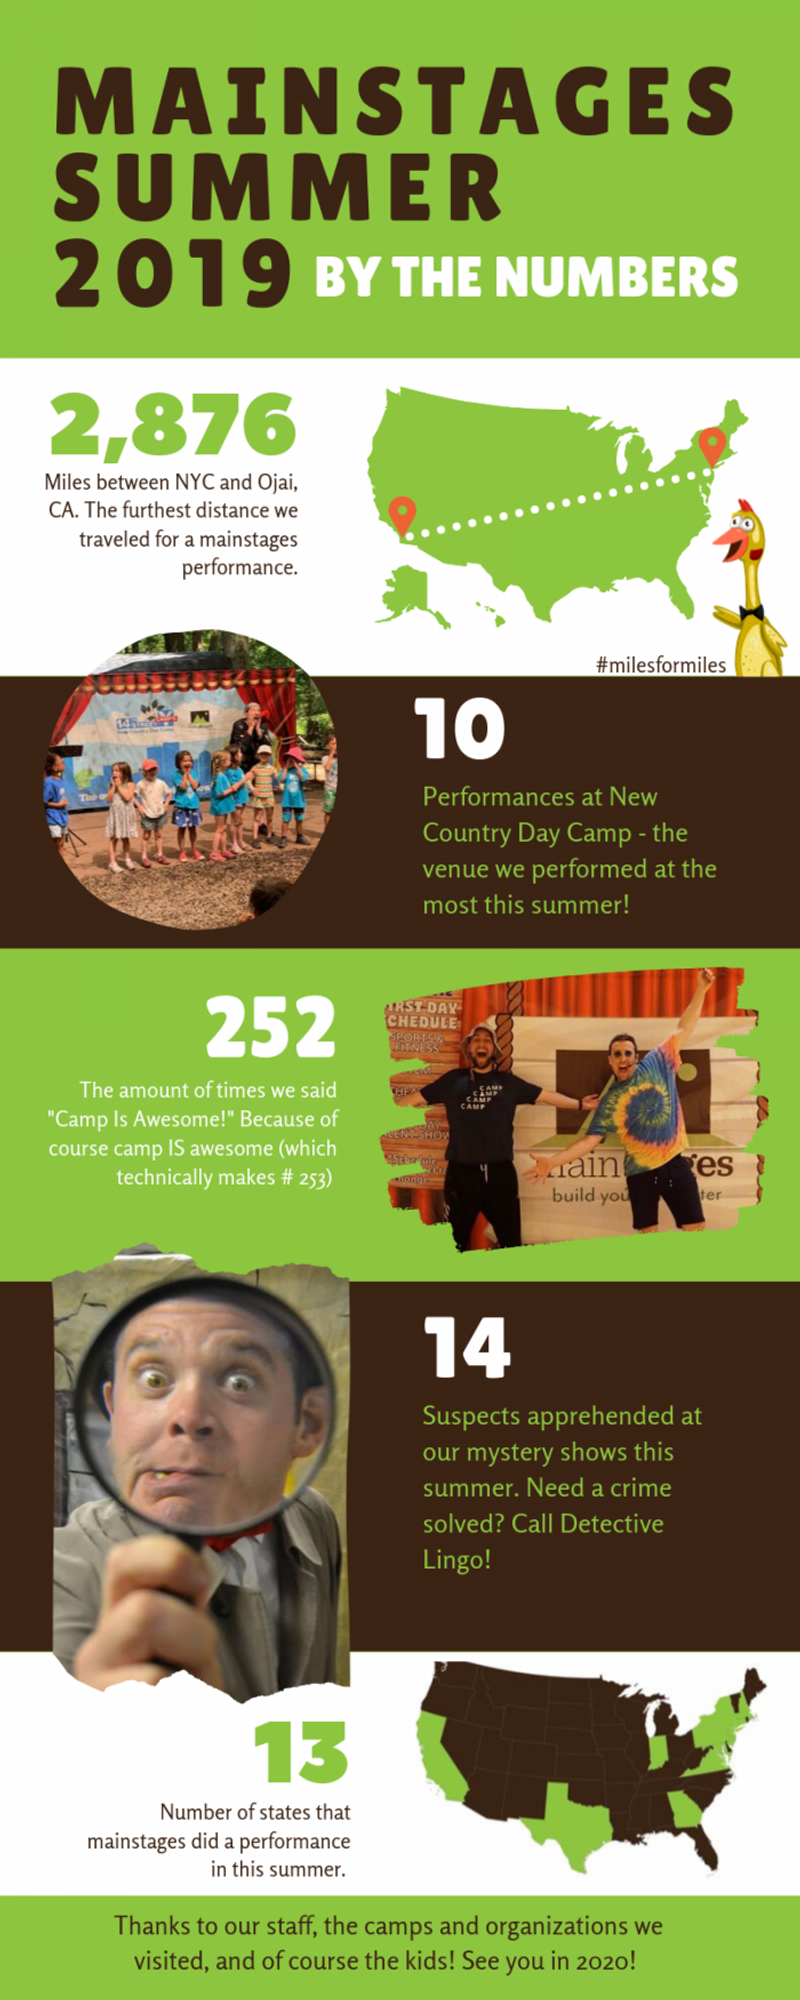 infographic titled 'mainstages summer 2019 by the numbers' image of USA map '2,876 miles between NYC and Ojai, CA. The furthest distance we traveled for a mainstages performance.' Image of kids on stage at a summer camp with a performer making a silly face, '10 performances at New Country Day Camp - the venue we performed at the most this summer!' Image of two performers in camp attire making excited faces and spreading their arms, '252 The amount of times we said 'Camp is Awesome!' because of course camp IS awesome (which technically makes # 253.' Image of a detective making a silly face into a magnifying glass '14 suspects apprehended at our mystery shows this summer. Need a crime solved? Call Detective Lingo!' Image of a map of the USA with 13 states highlighted in green, '13 number of states that mainstages did a performance in this summer.' Text at the bottom of the infographic says 'Thanks to our staff, the camps, and organizations we visited, and of course the kids! See you in 2020!'